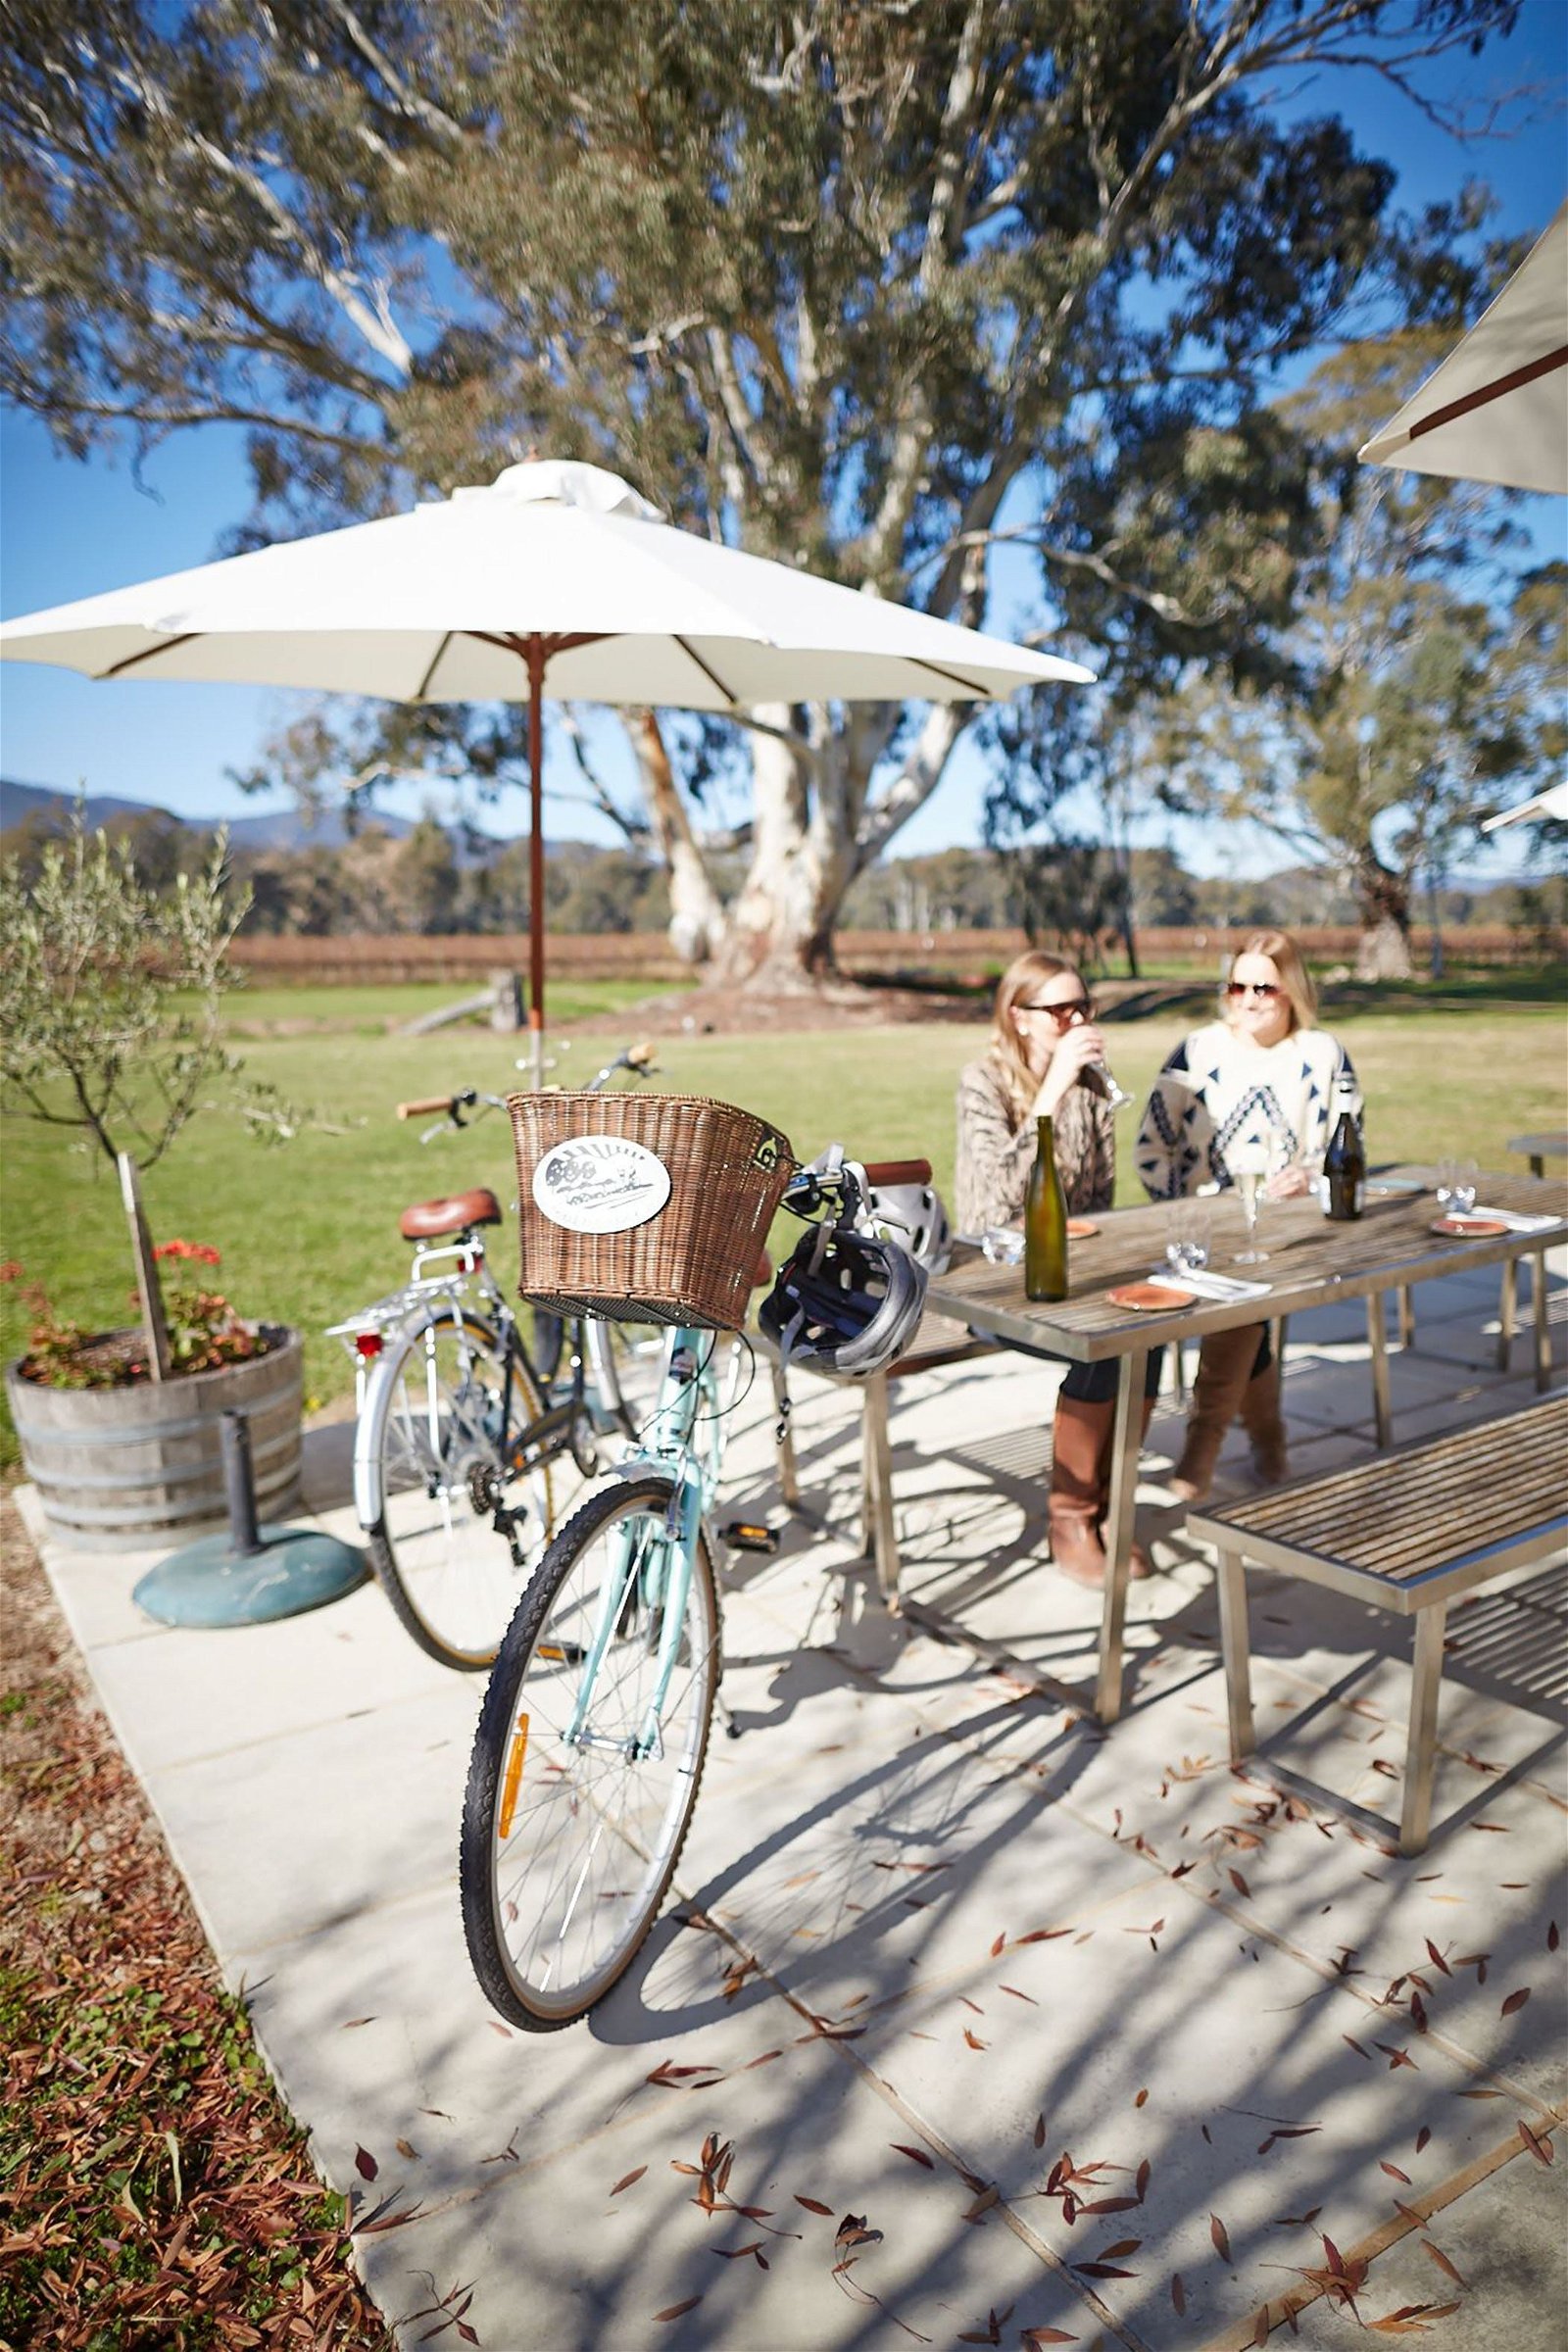 Dal Zotto Wines Cellar Door - Northern Rivers Accommodation